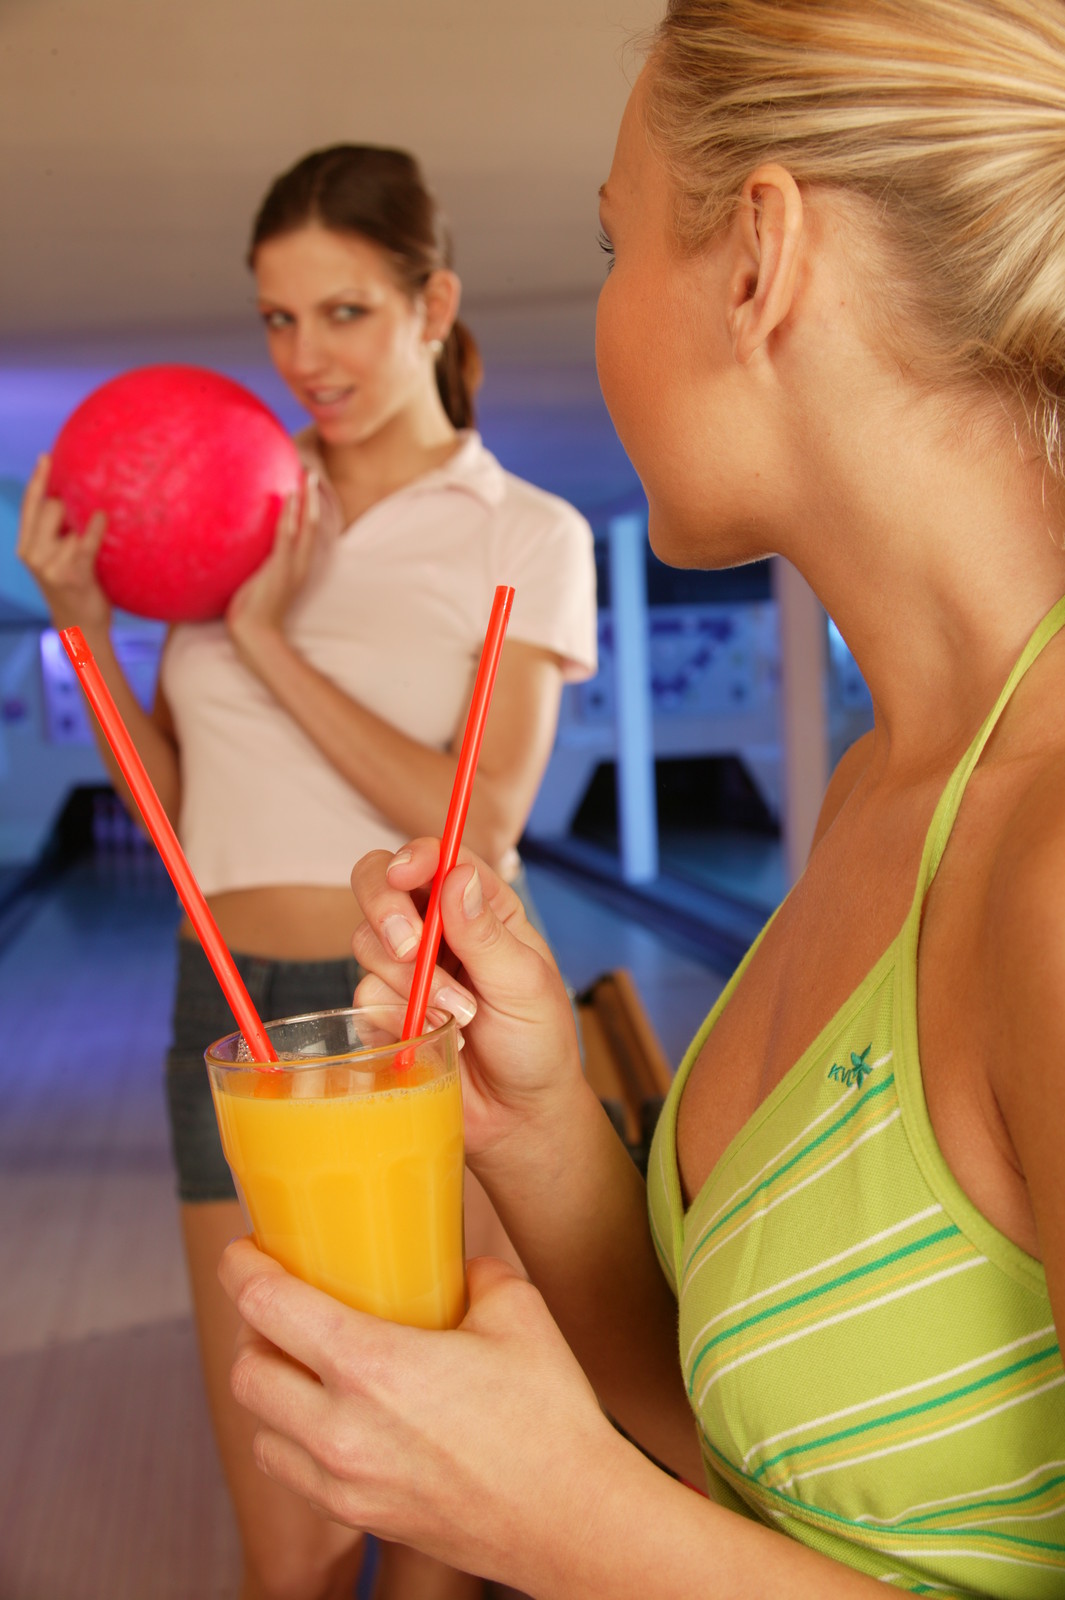 hot-lesbian-action-at-the-bowling-alley-4